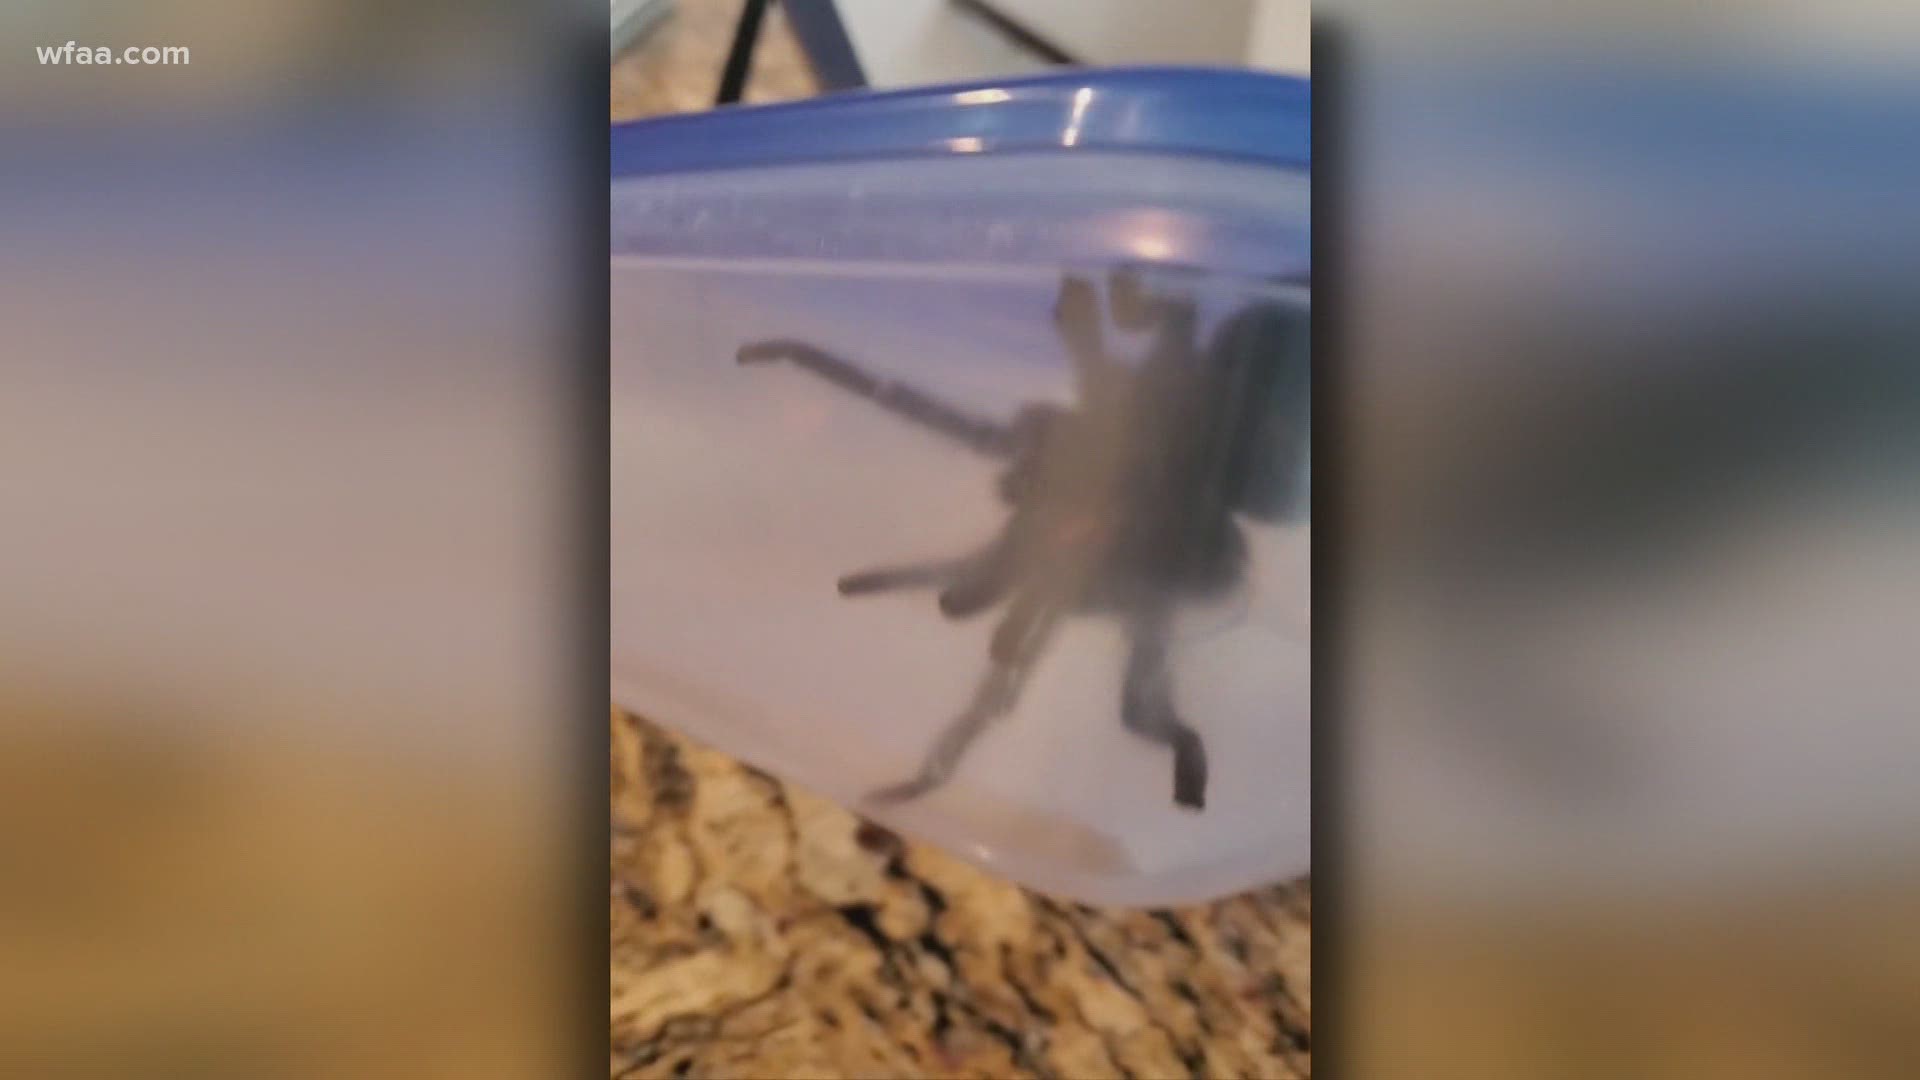 The woman said she saw the spider when her dog was just a few feet away.